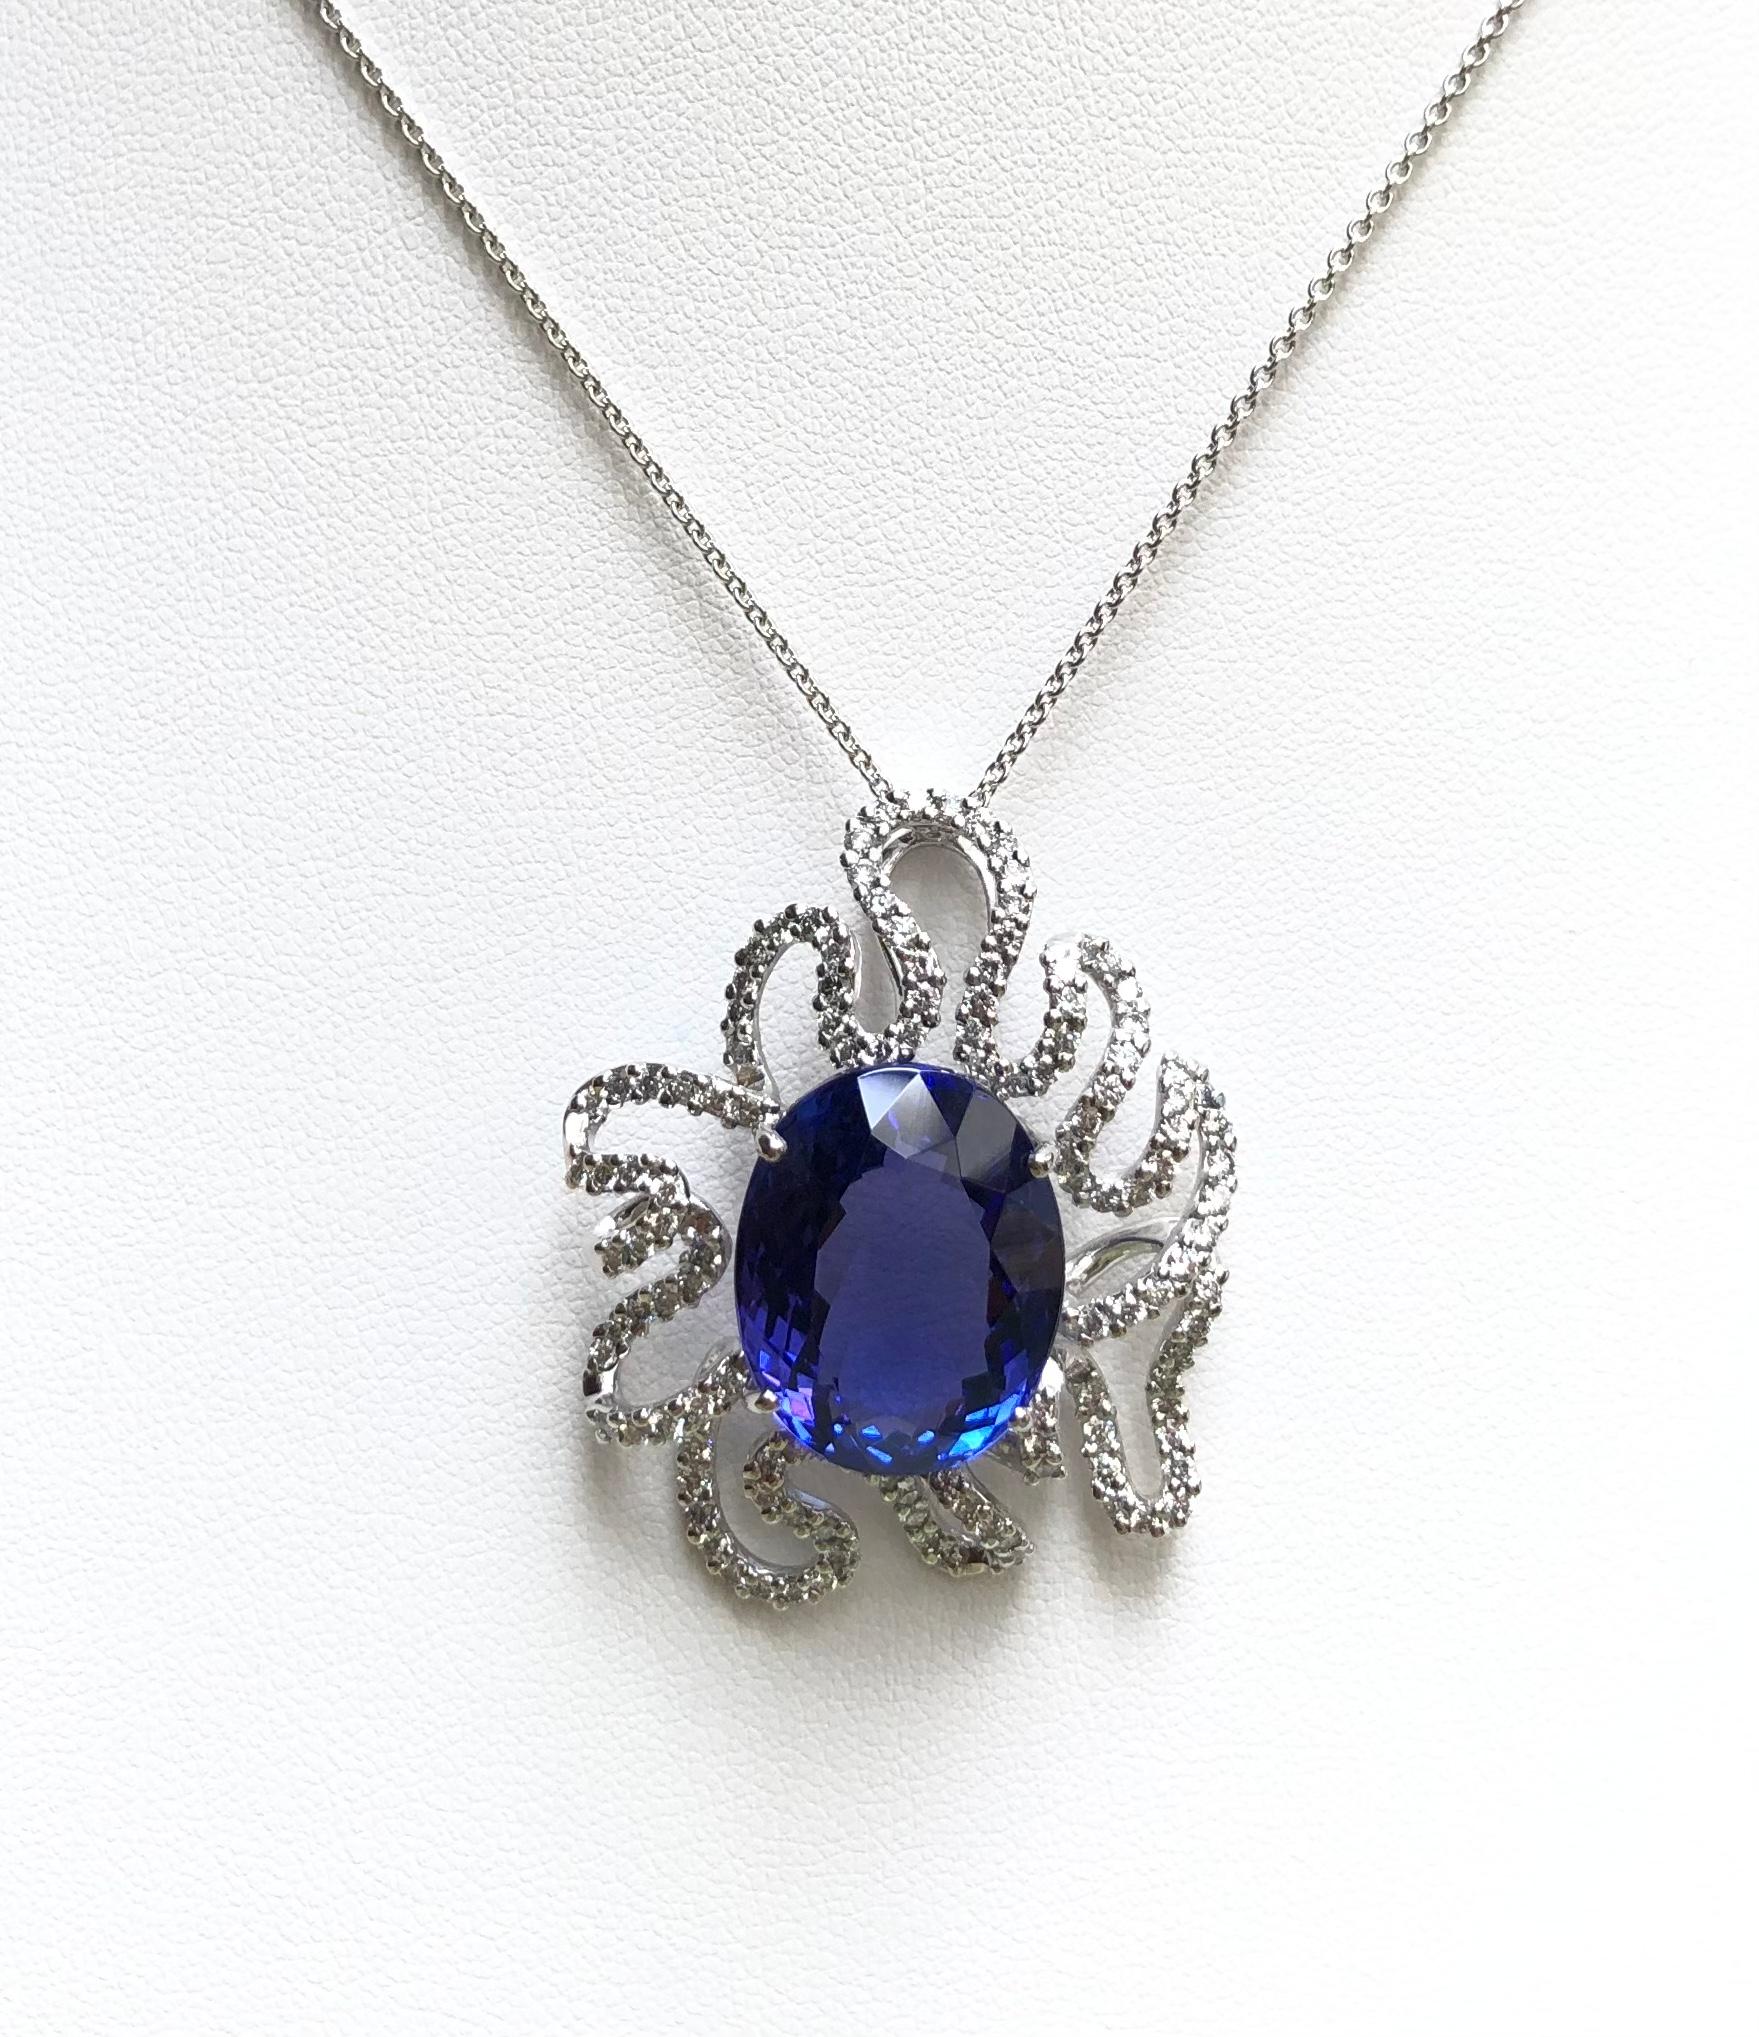 Tanzanite 21.75 carats with Diamond 1.73 carats Pendant set in 18 Karat White Gold Settings
(chain not included)

Width: 3.0 cm 
Length: 4.0 cm
Total Weight: 13.26 grams

